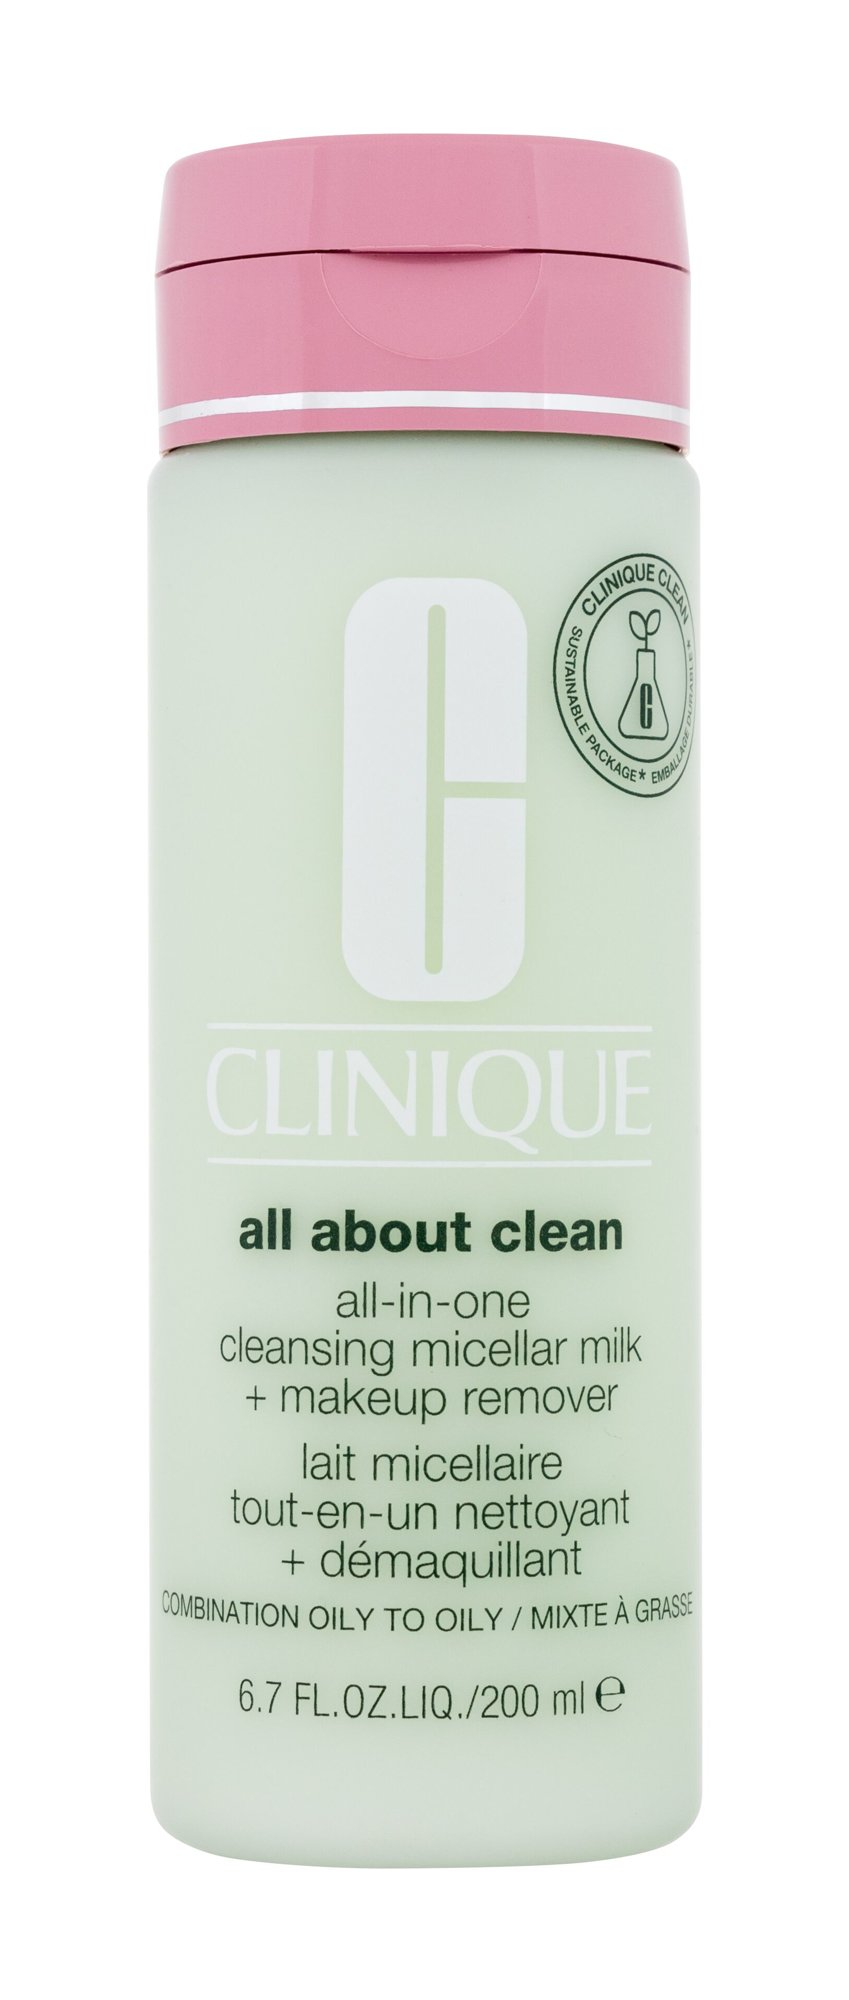 Clinique All About Clean Cleansing Micellar Milk + Makeup Remover veido pienelis 